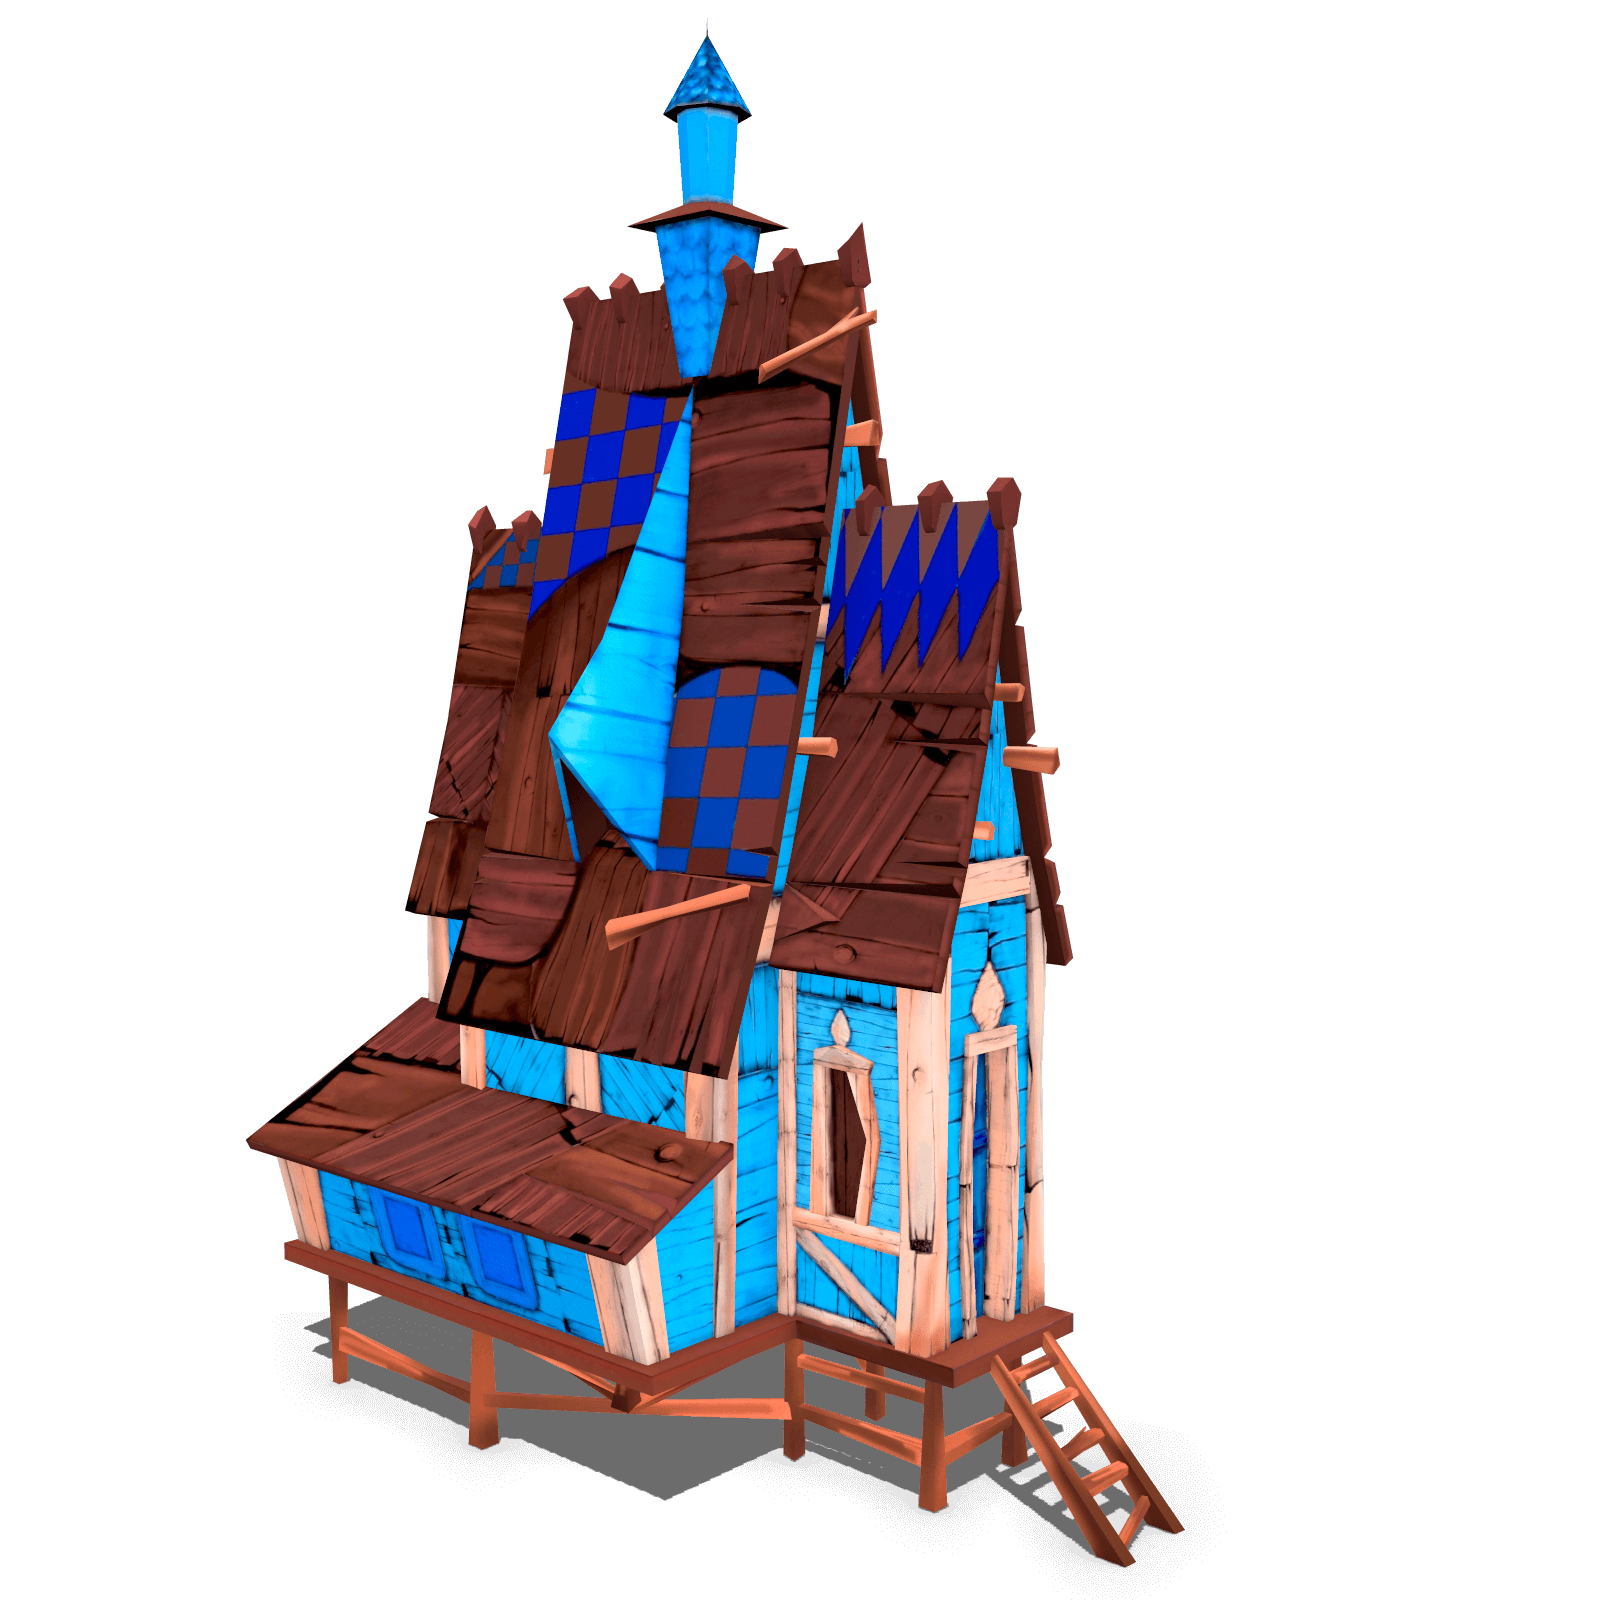 Low Poly Stylized Wooden House - LowlyPoly